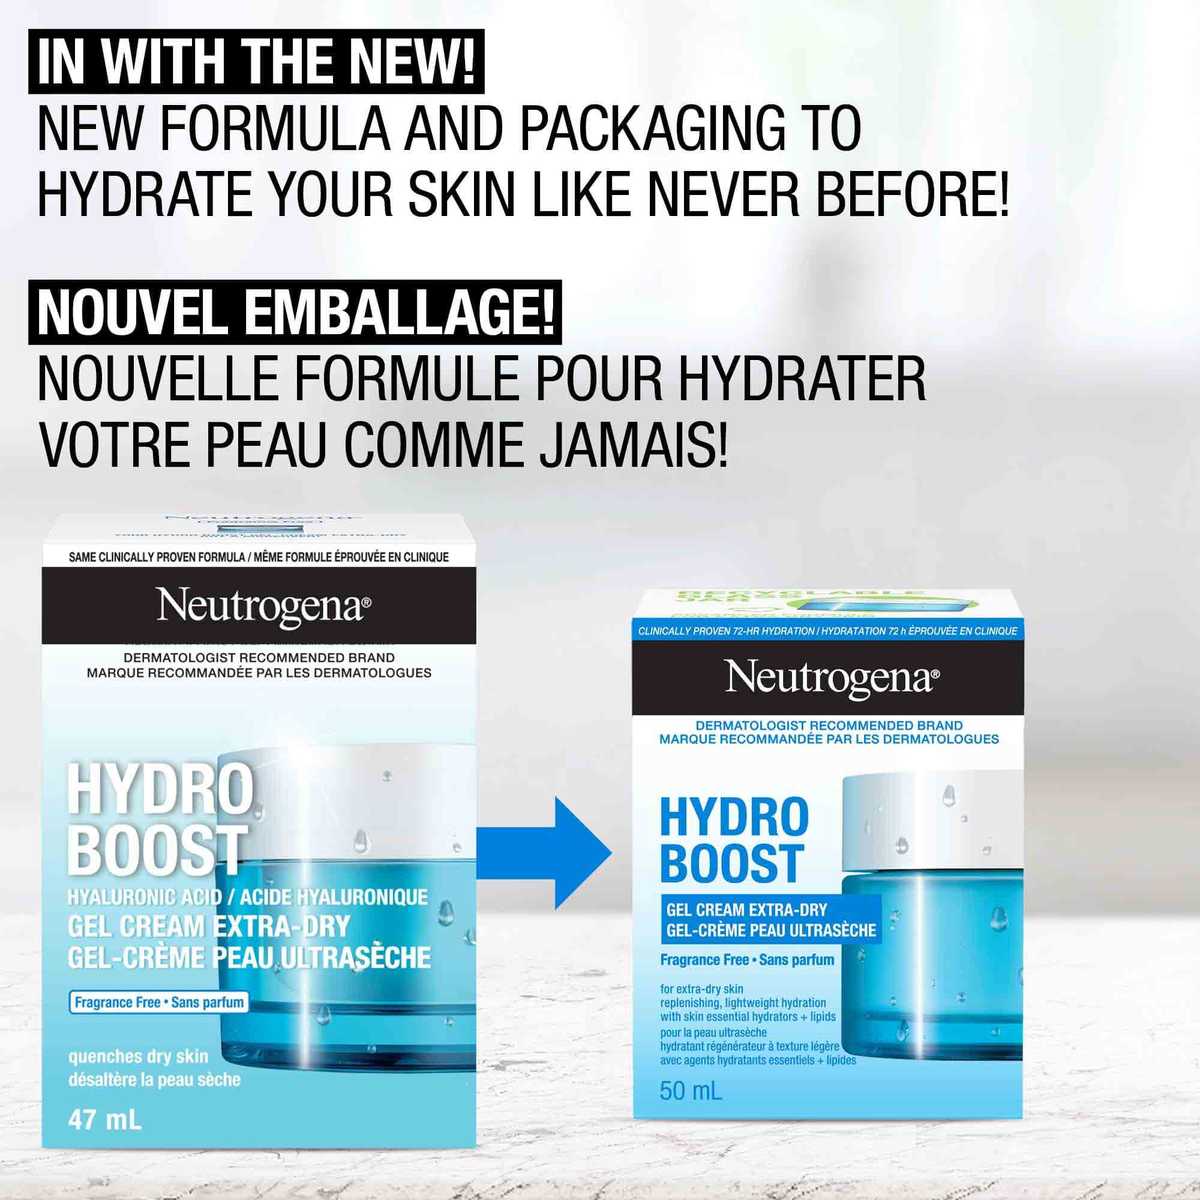 Old and the new packaging of NEUTROGENA® Hydro Boost Gel Cream Extra Dry with a text' New Formula and Packaging to hydrate your skin like never before'